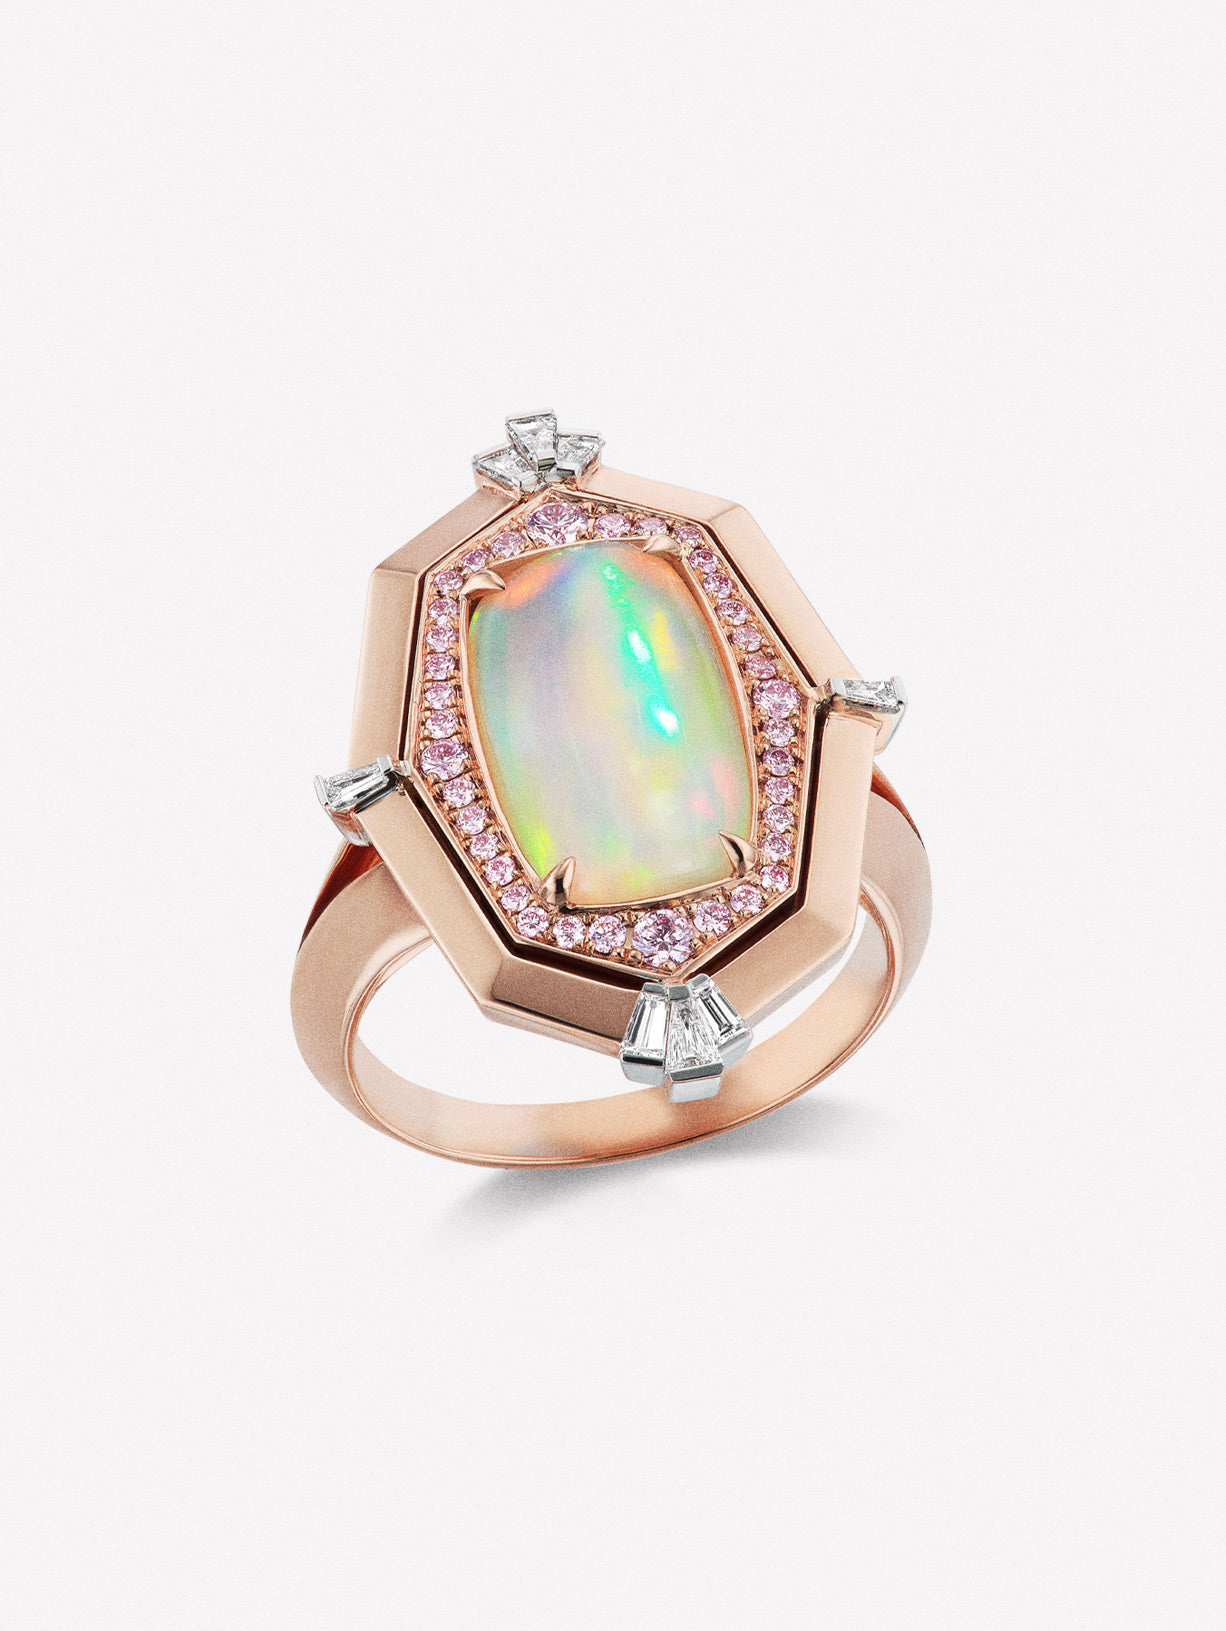 Deco inspired Argyle Pink™ Diamond and White Opal Ring by J FINE